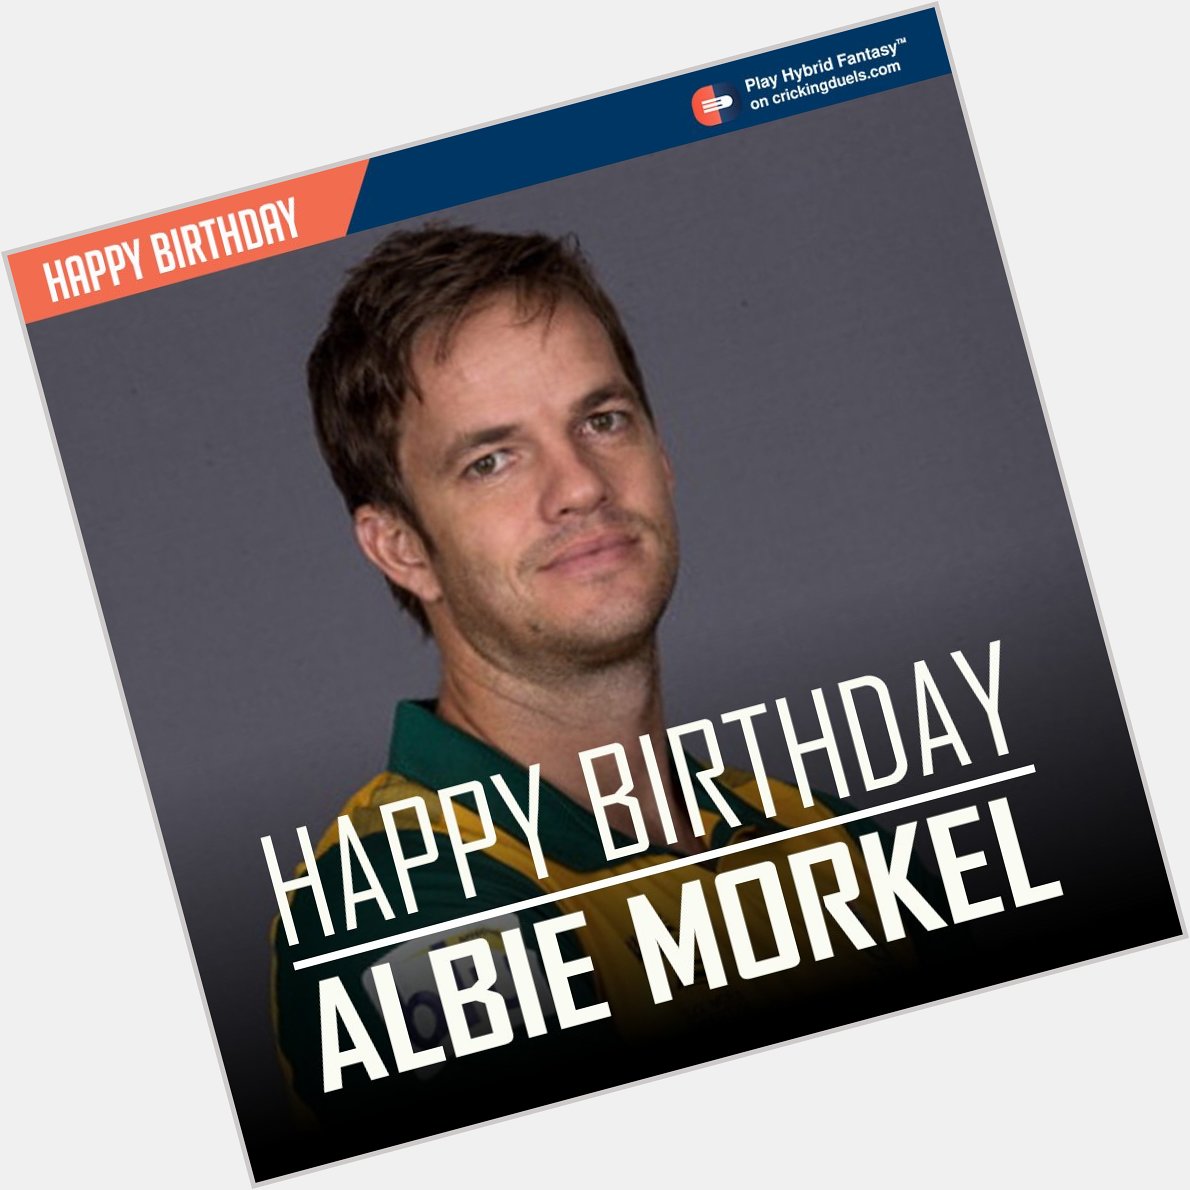 Happy Birthday Albie Morkel. The South African cricketer turns 36 today. 